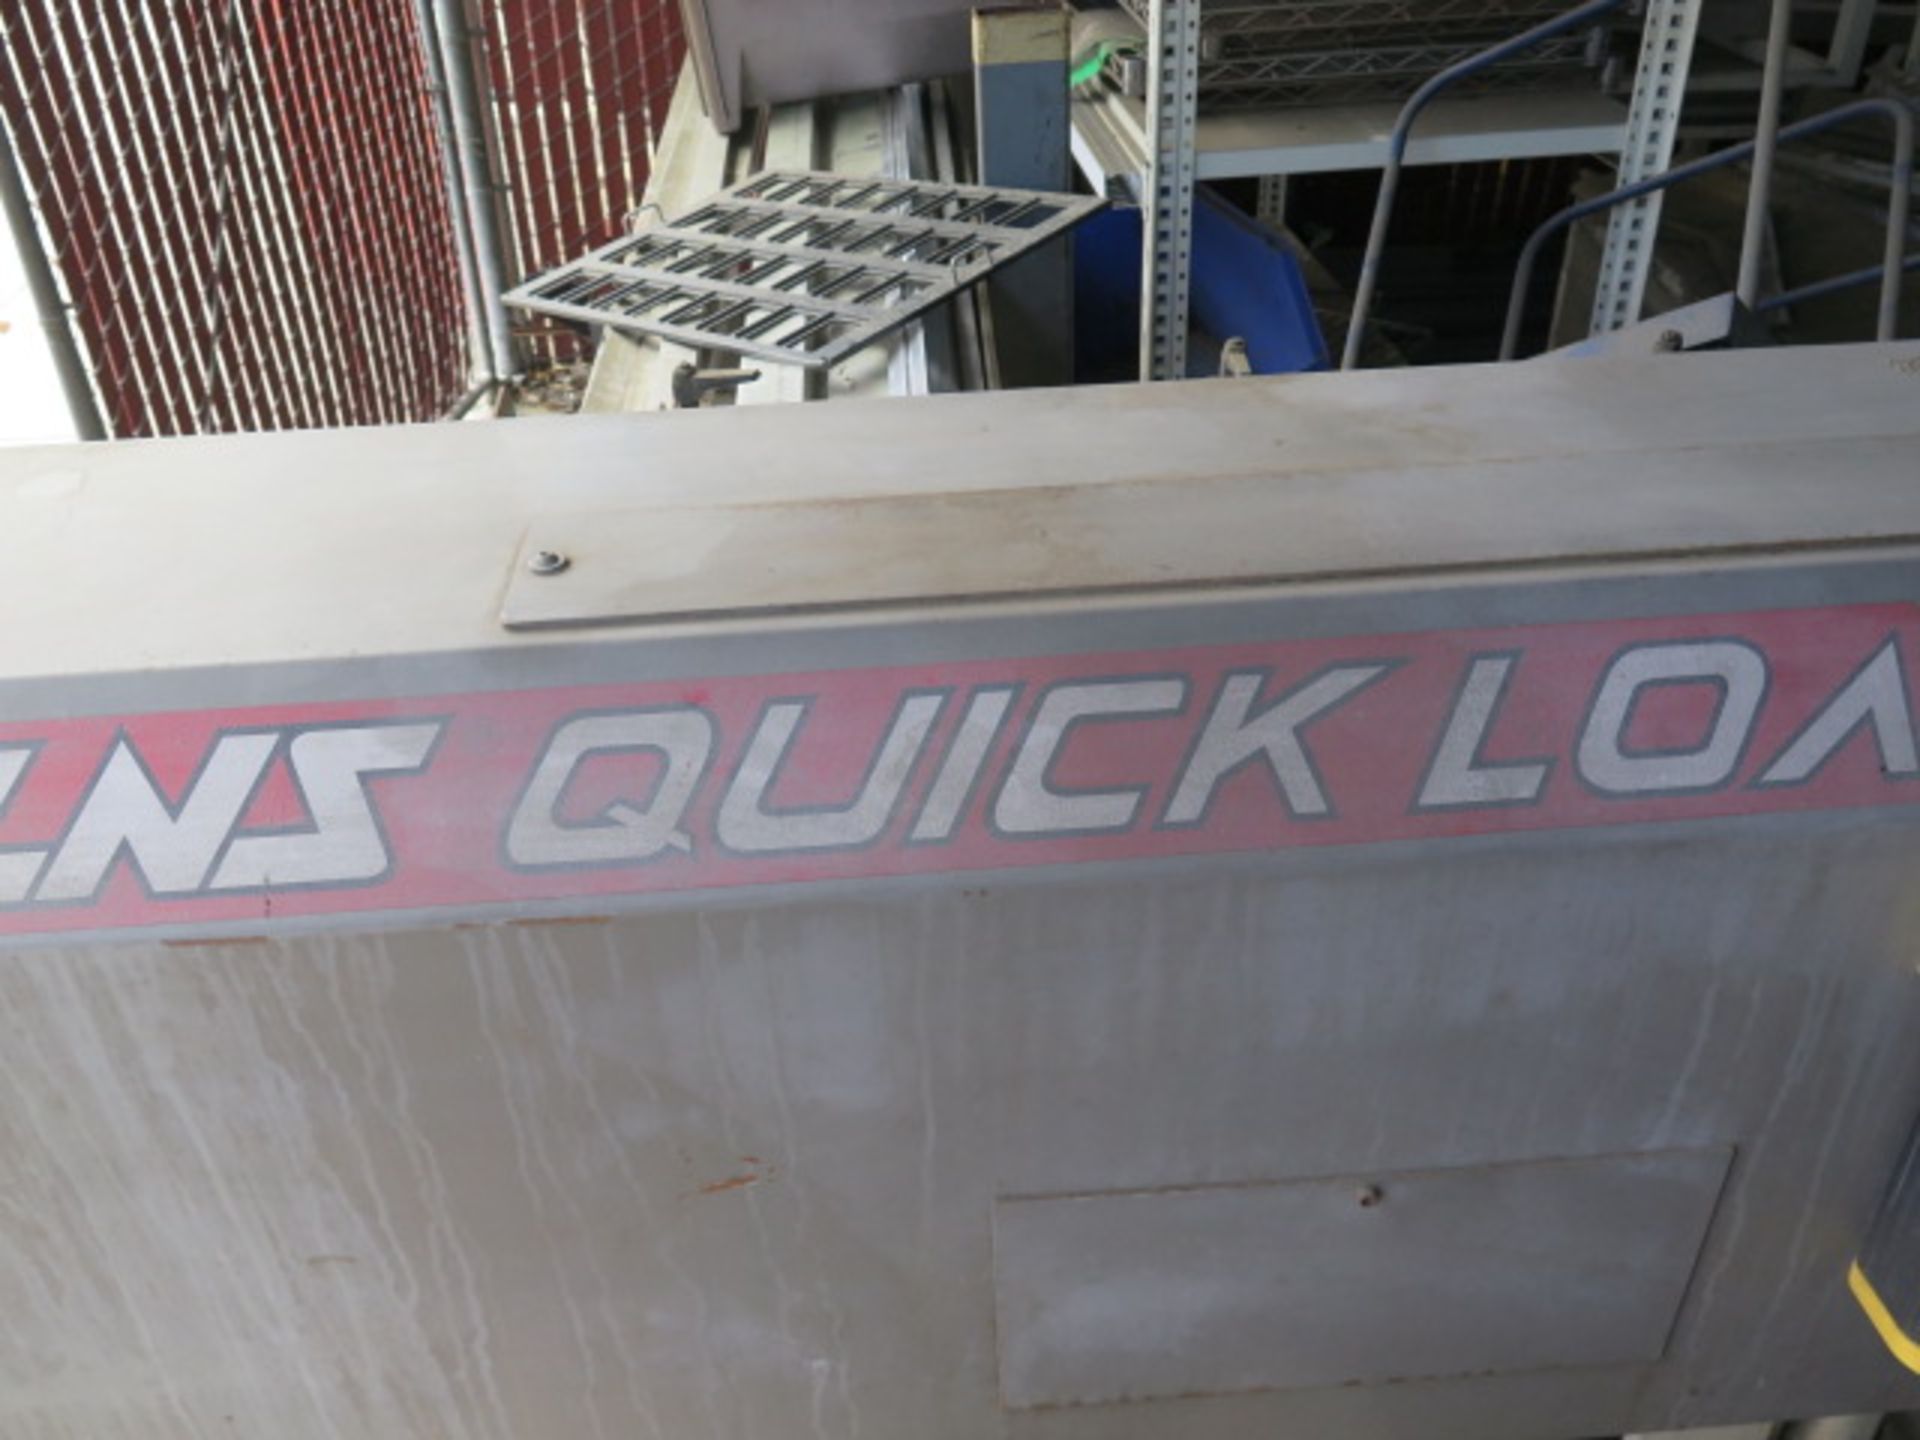 LNS Quick Load Automatic Bar Loader / Feeder (SOLD AS-IS - NO WARRANTY) (Located at 2091 Fortune Dr. - Image 5 of 6